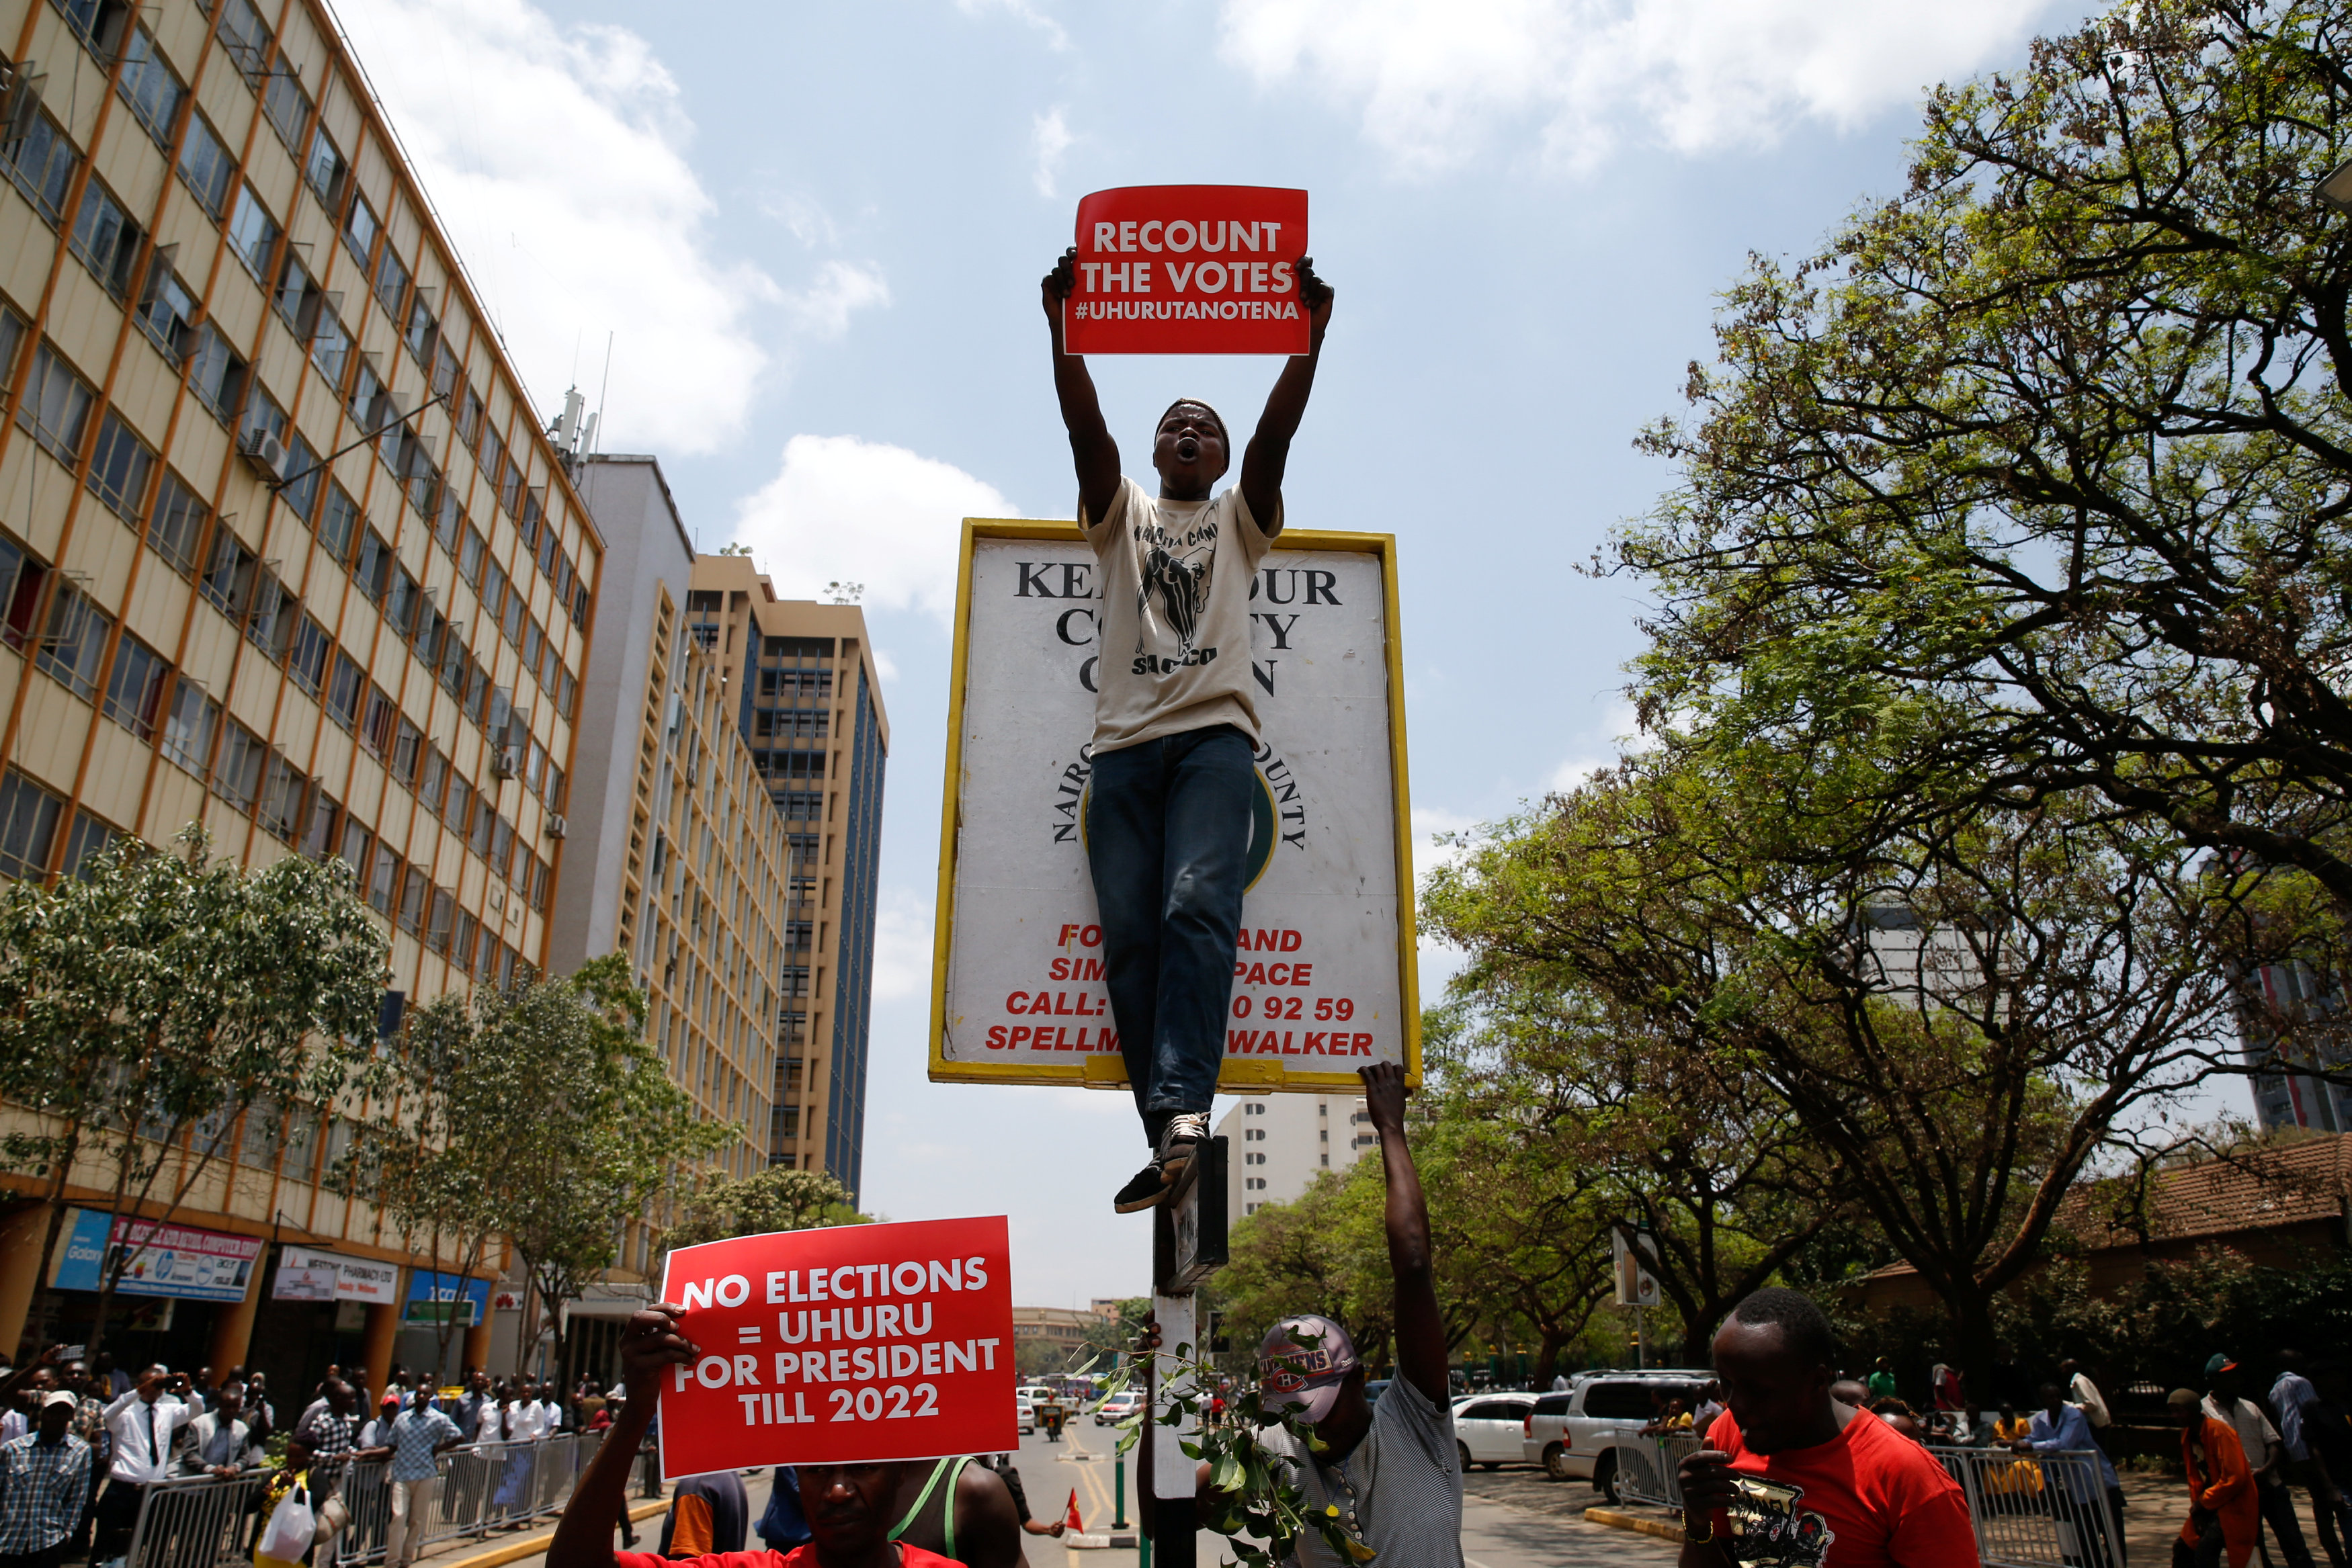 In pictures: Supporters of President Uhuru Kenyatta protest against court decision nullifying his poll victory